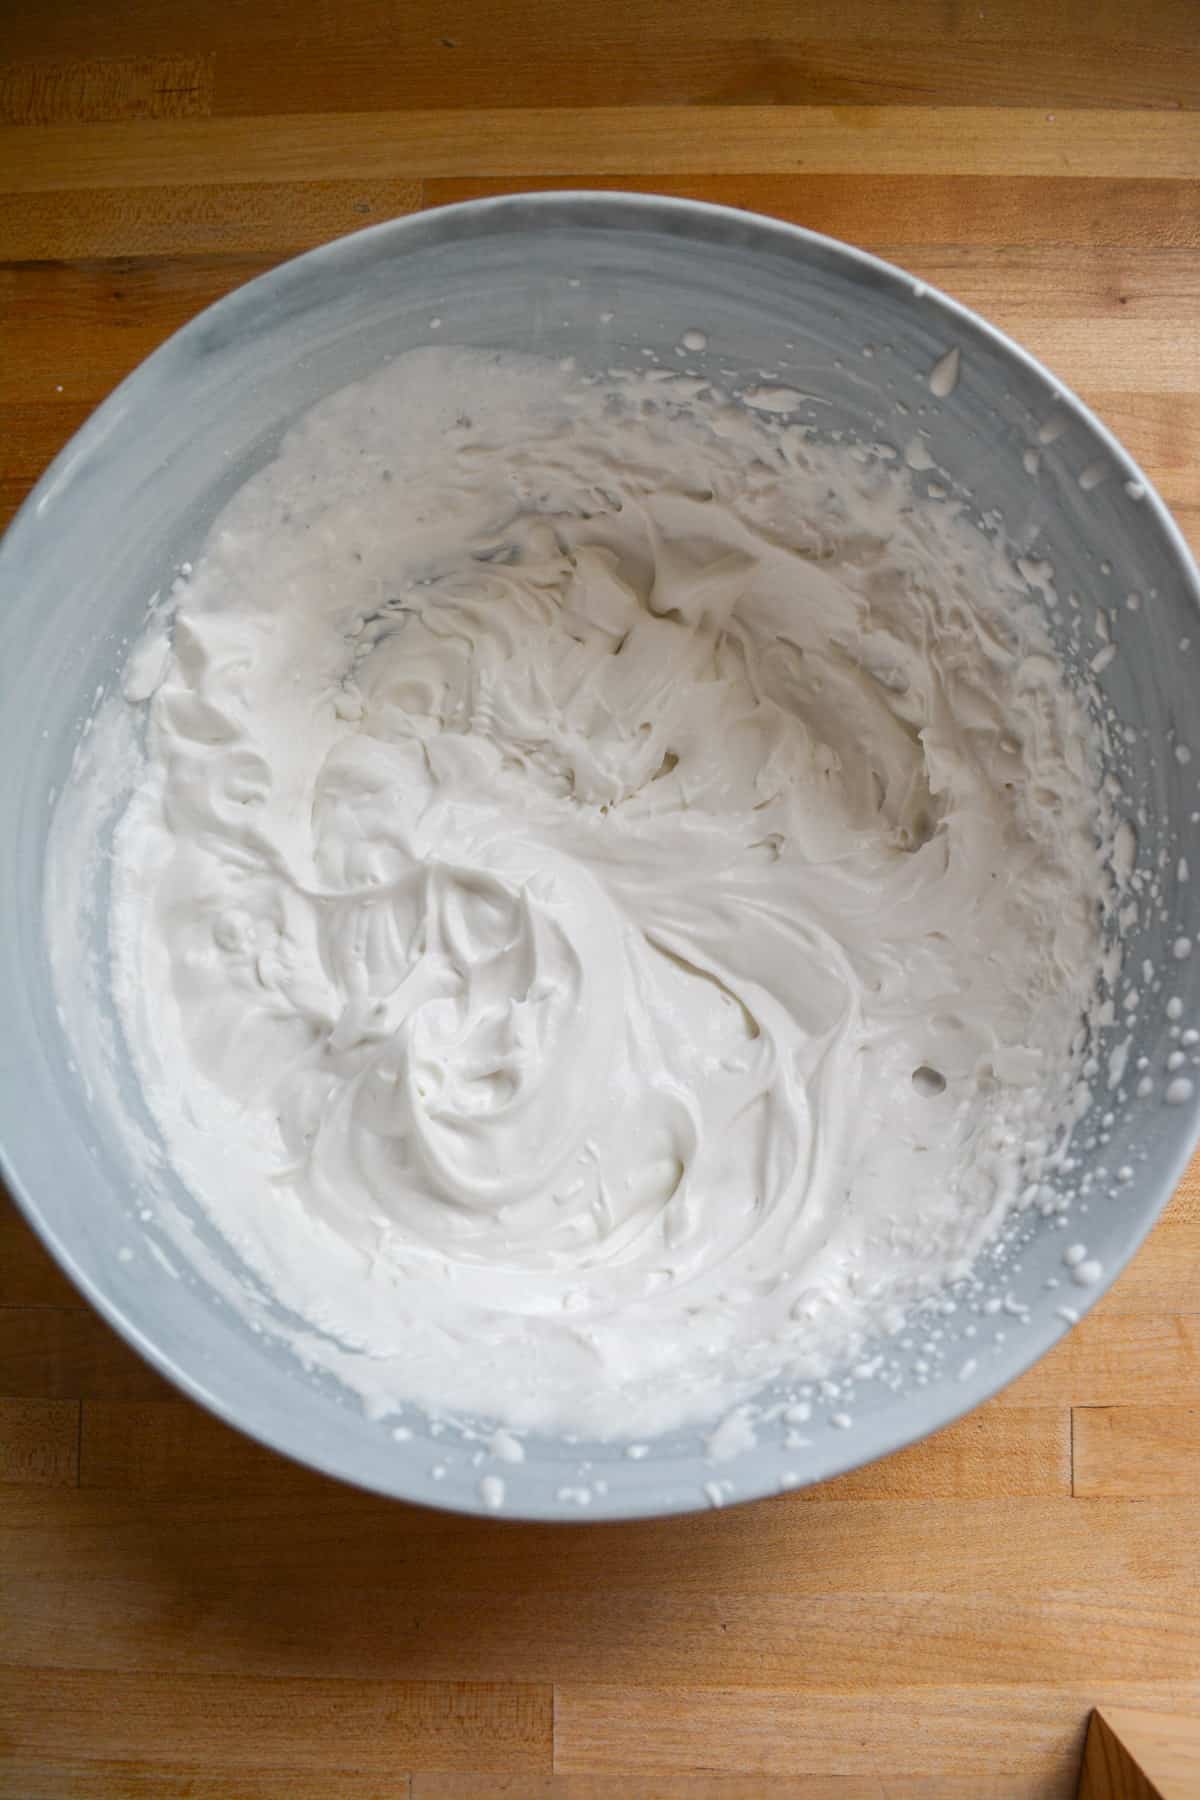 Whipped vegan cream in a mixing bowl.